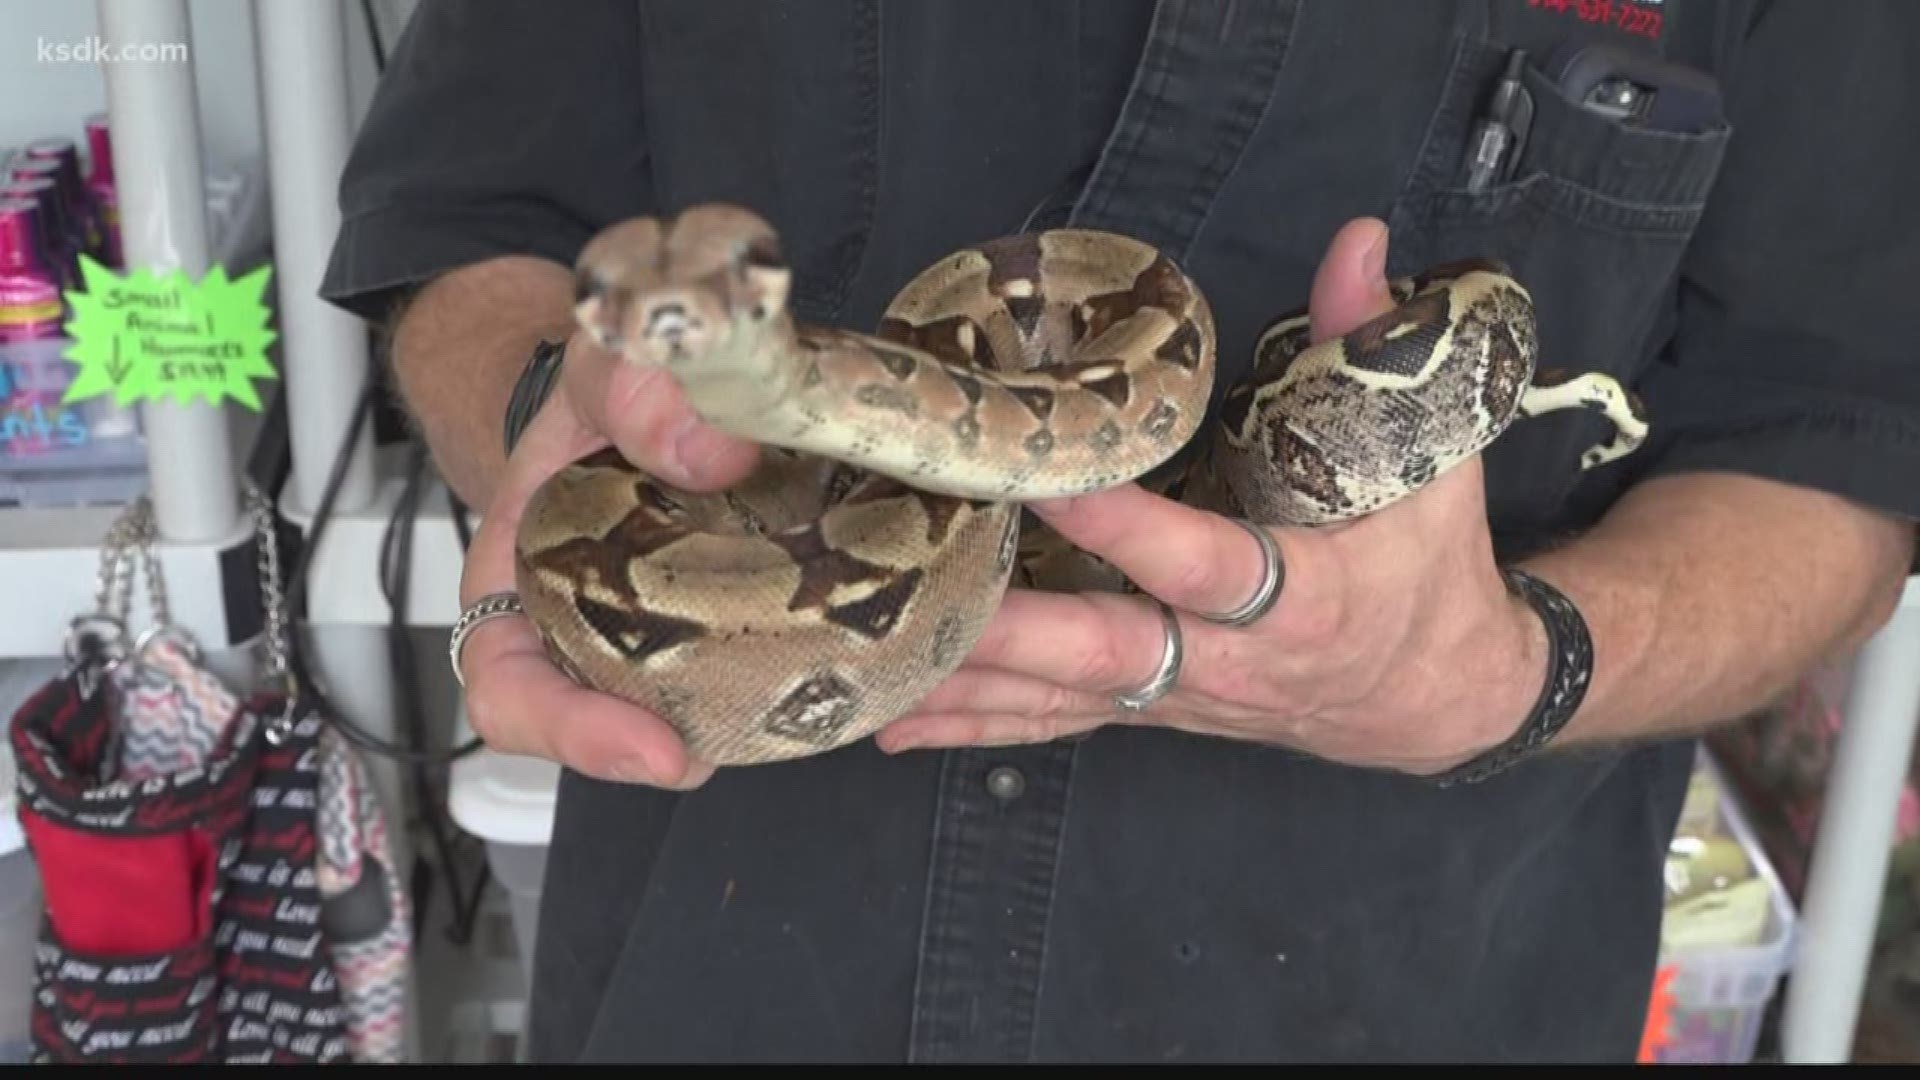 Owner of Lemay reptile shop believes stolen boa may have bitten thief | www.speedy25.com